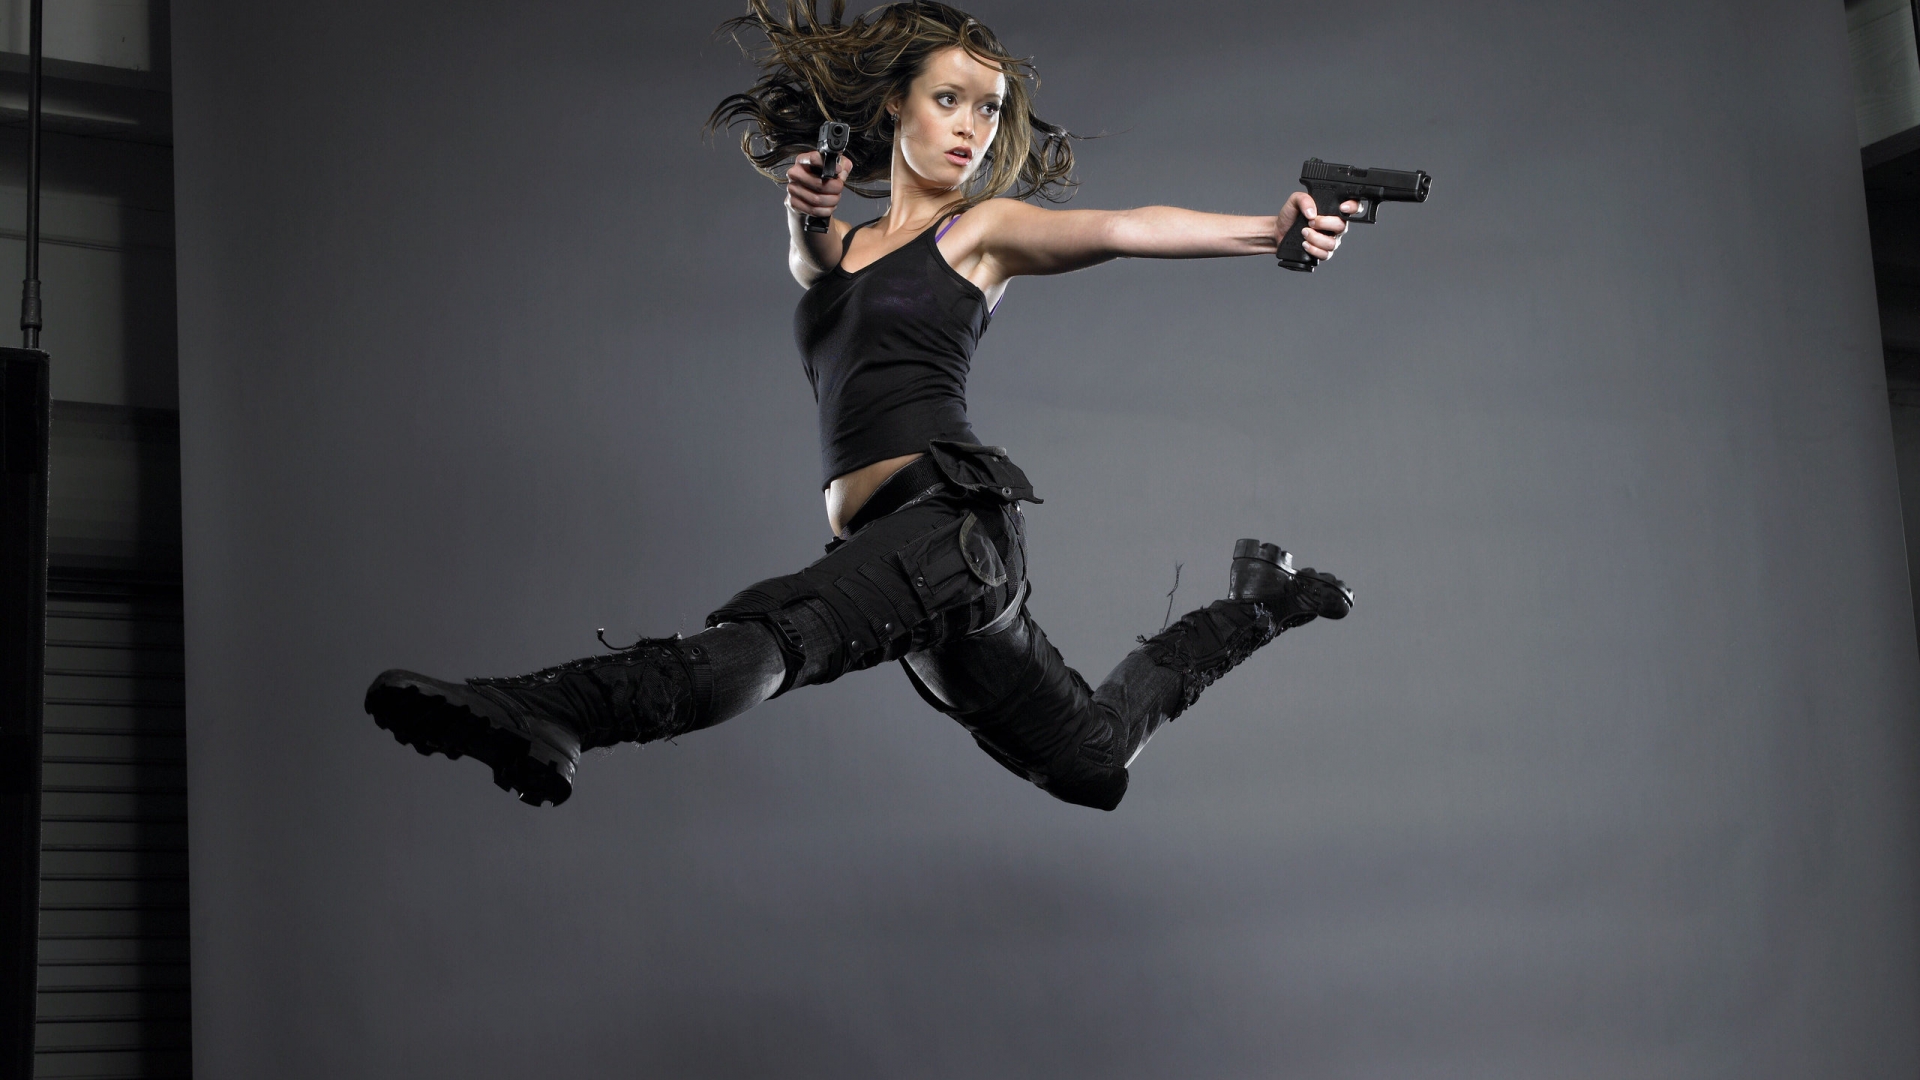 Summer Glau With Guns for 1920 x 1080 HDTV 1080p resolution